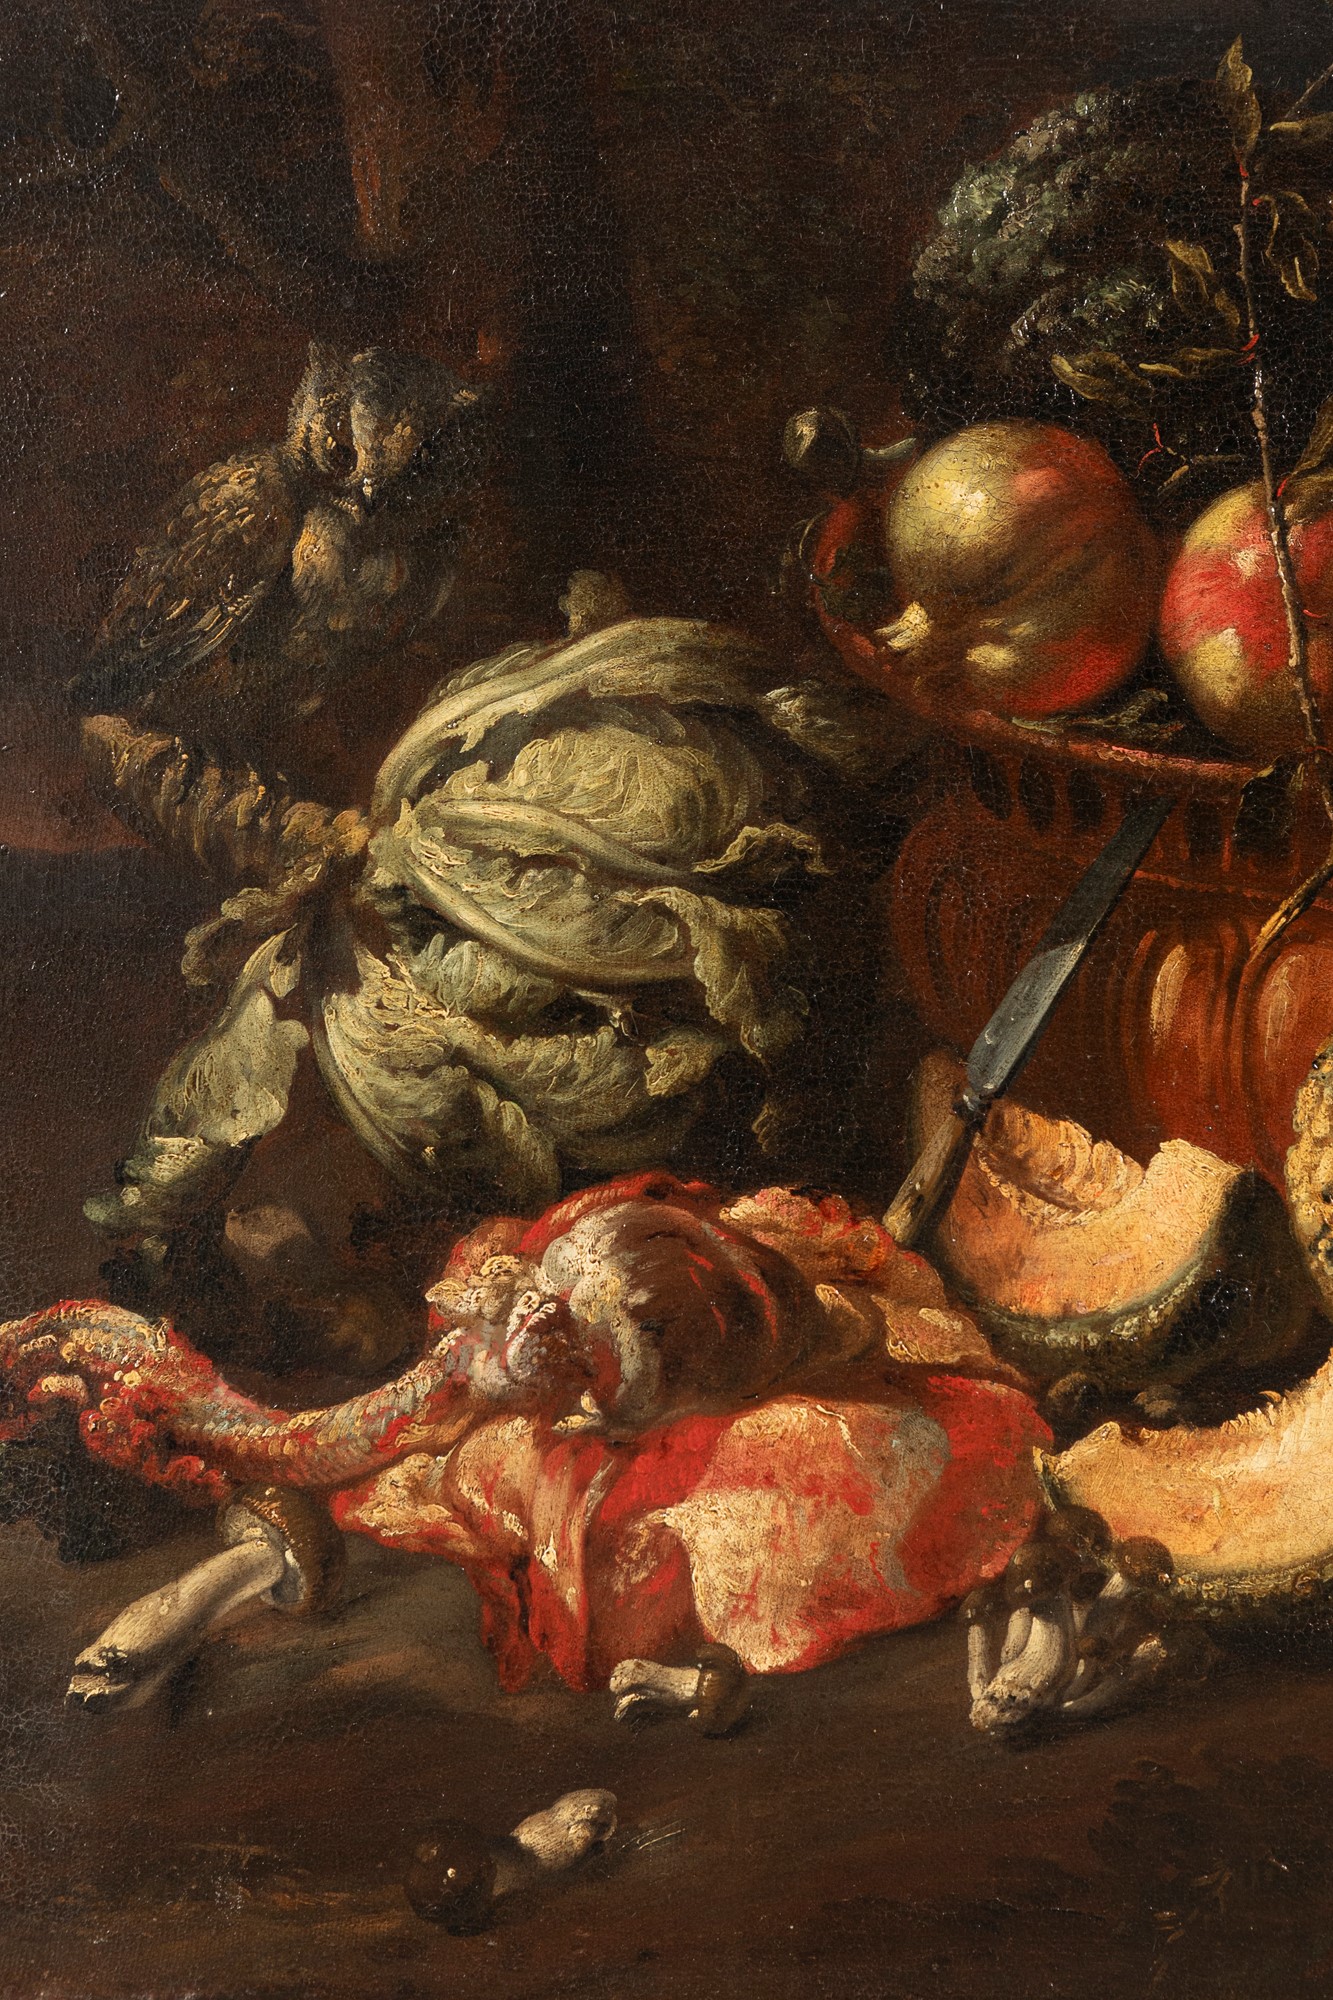 Felice Boselli (Piacenza 1650-Parma 1732) - Entrails, vegetables and fruits with a owl - Image 4 of 7